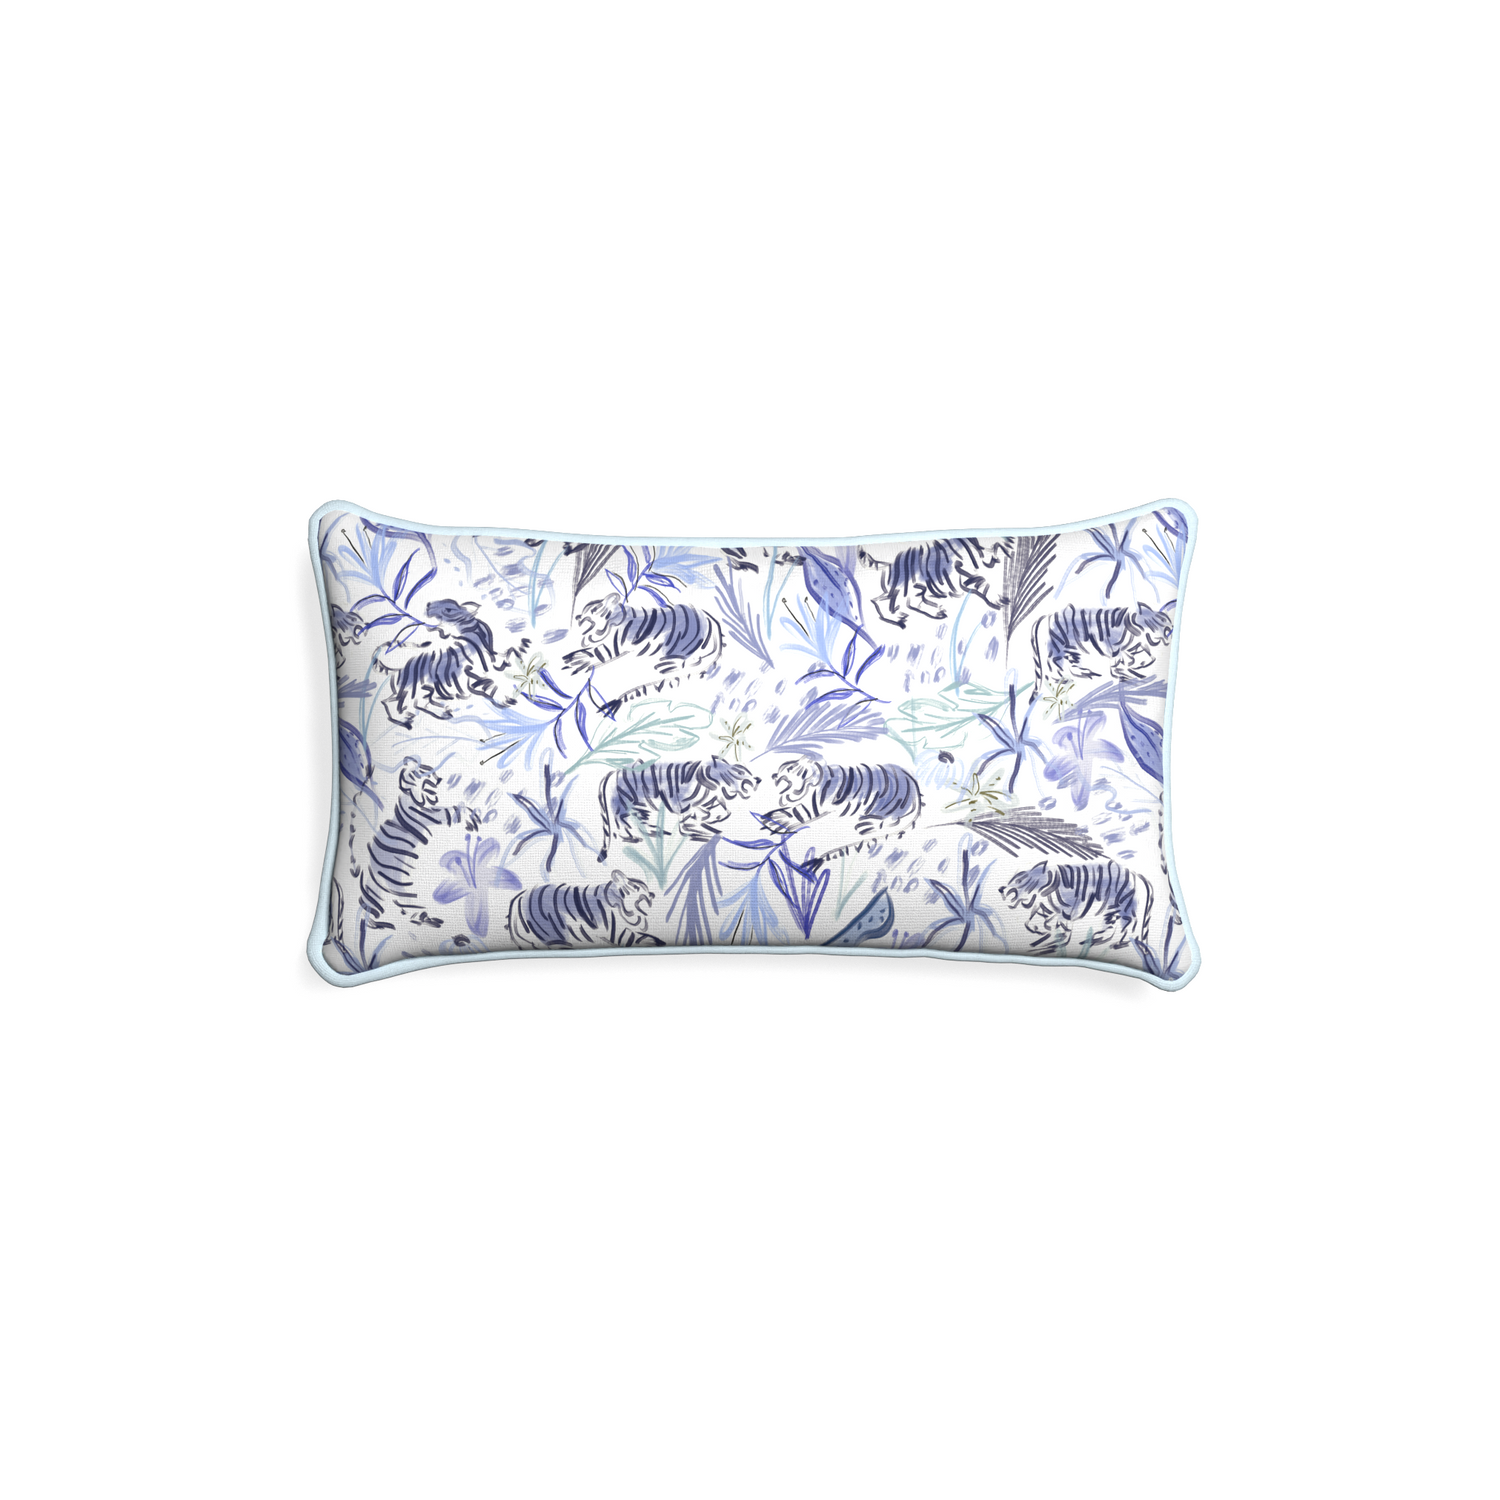 Petite-lumbar frida blue custom blue with intricate tiger designpillow with powder piping on white background